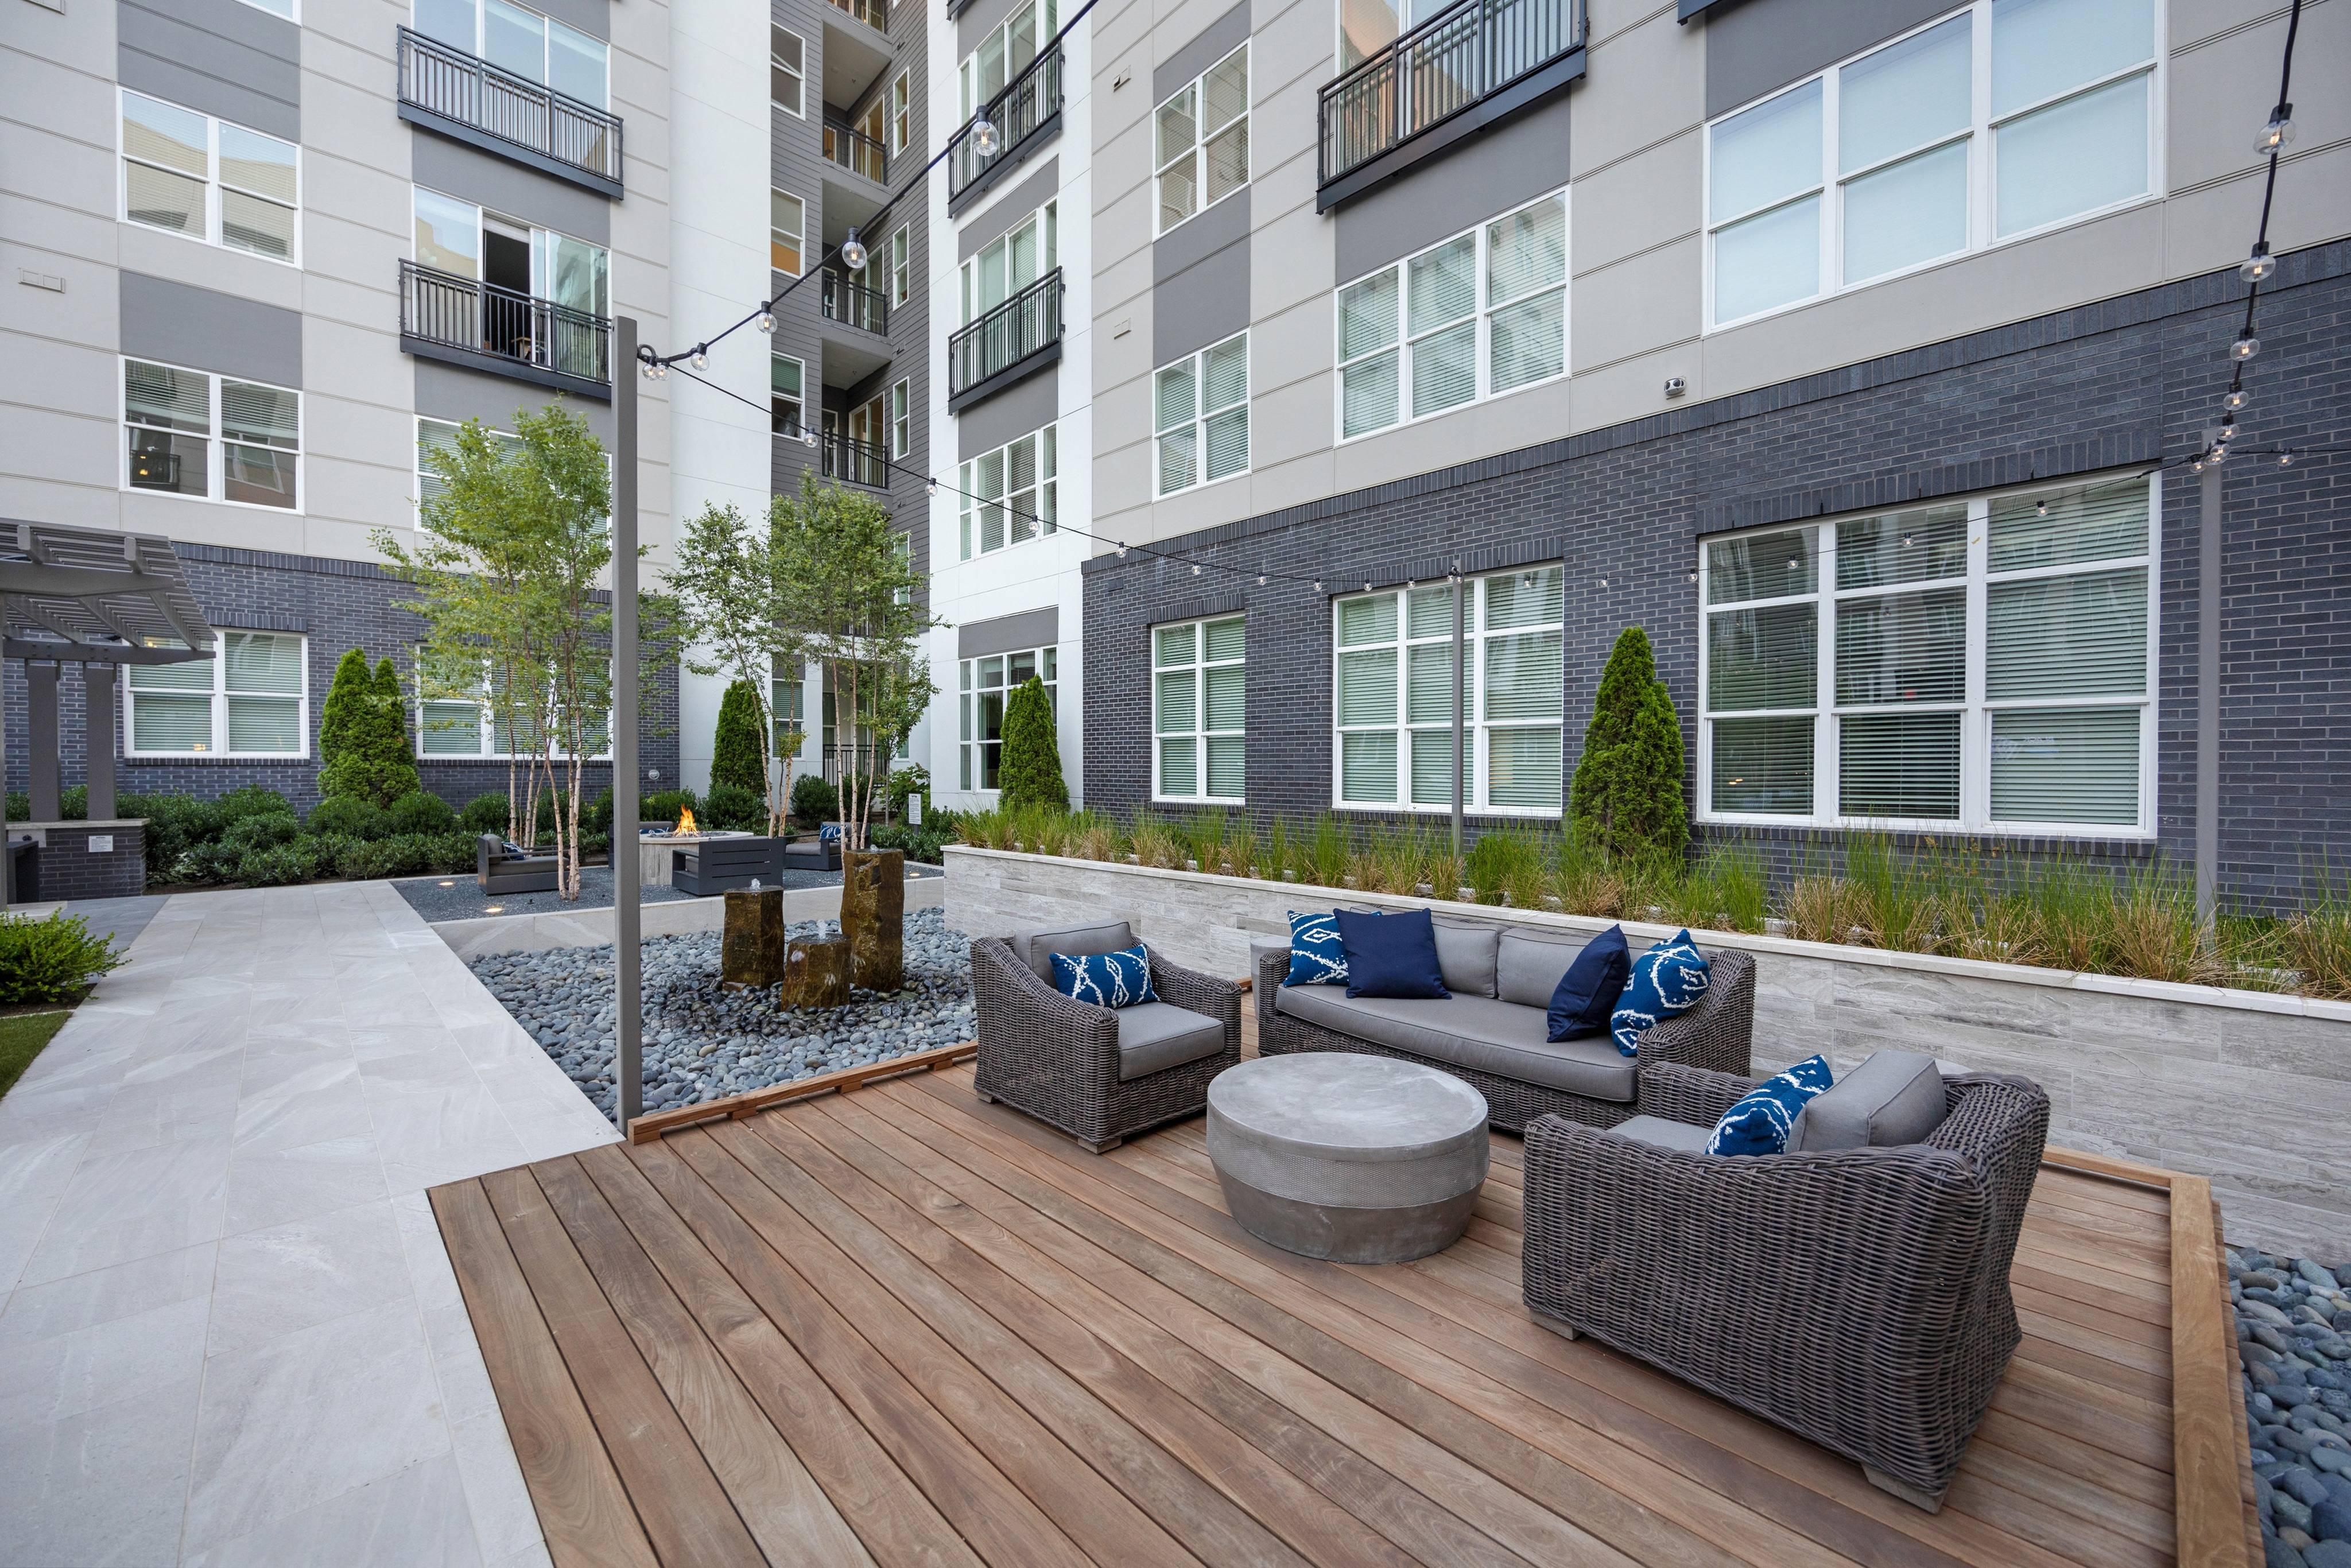 Outdoor Fountain Feature, Wood Decks with Lounge Seating, and Outdoor TVs